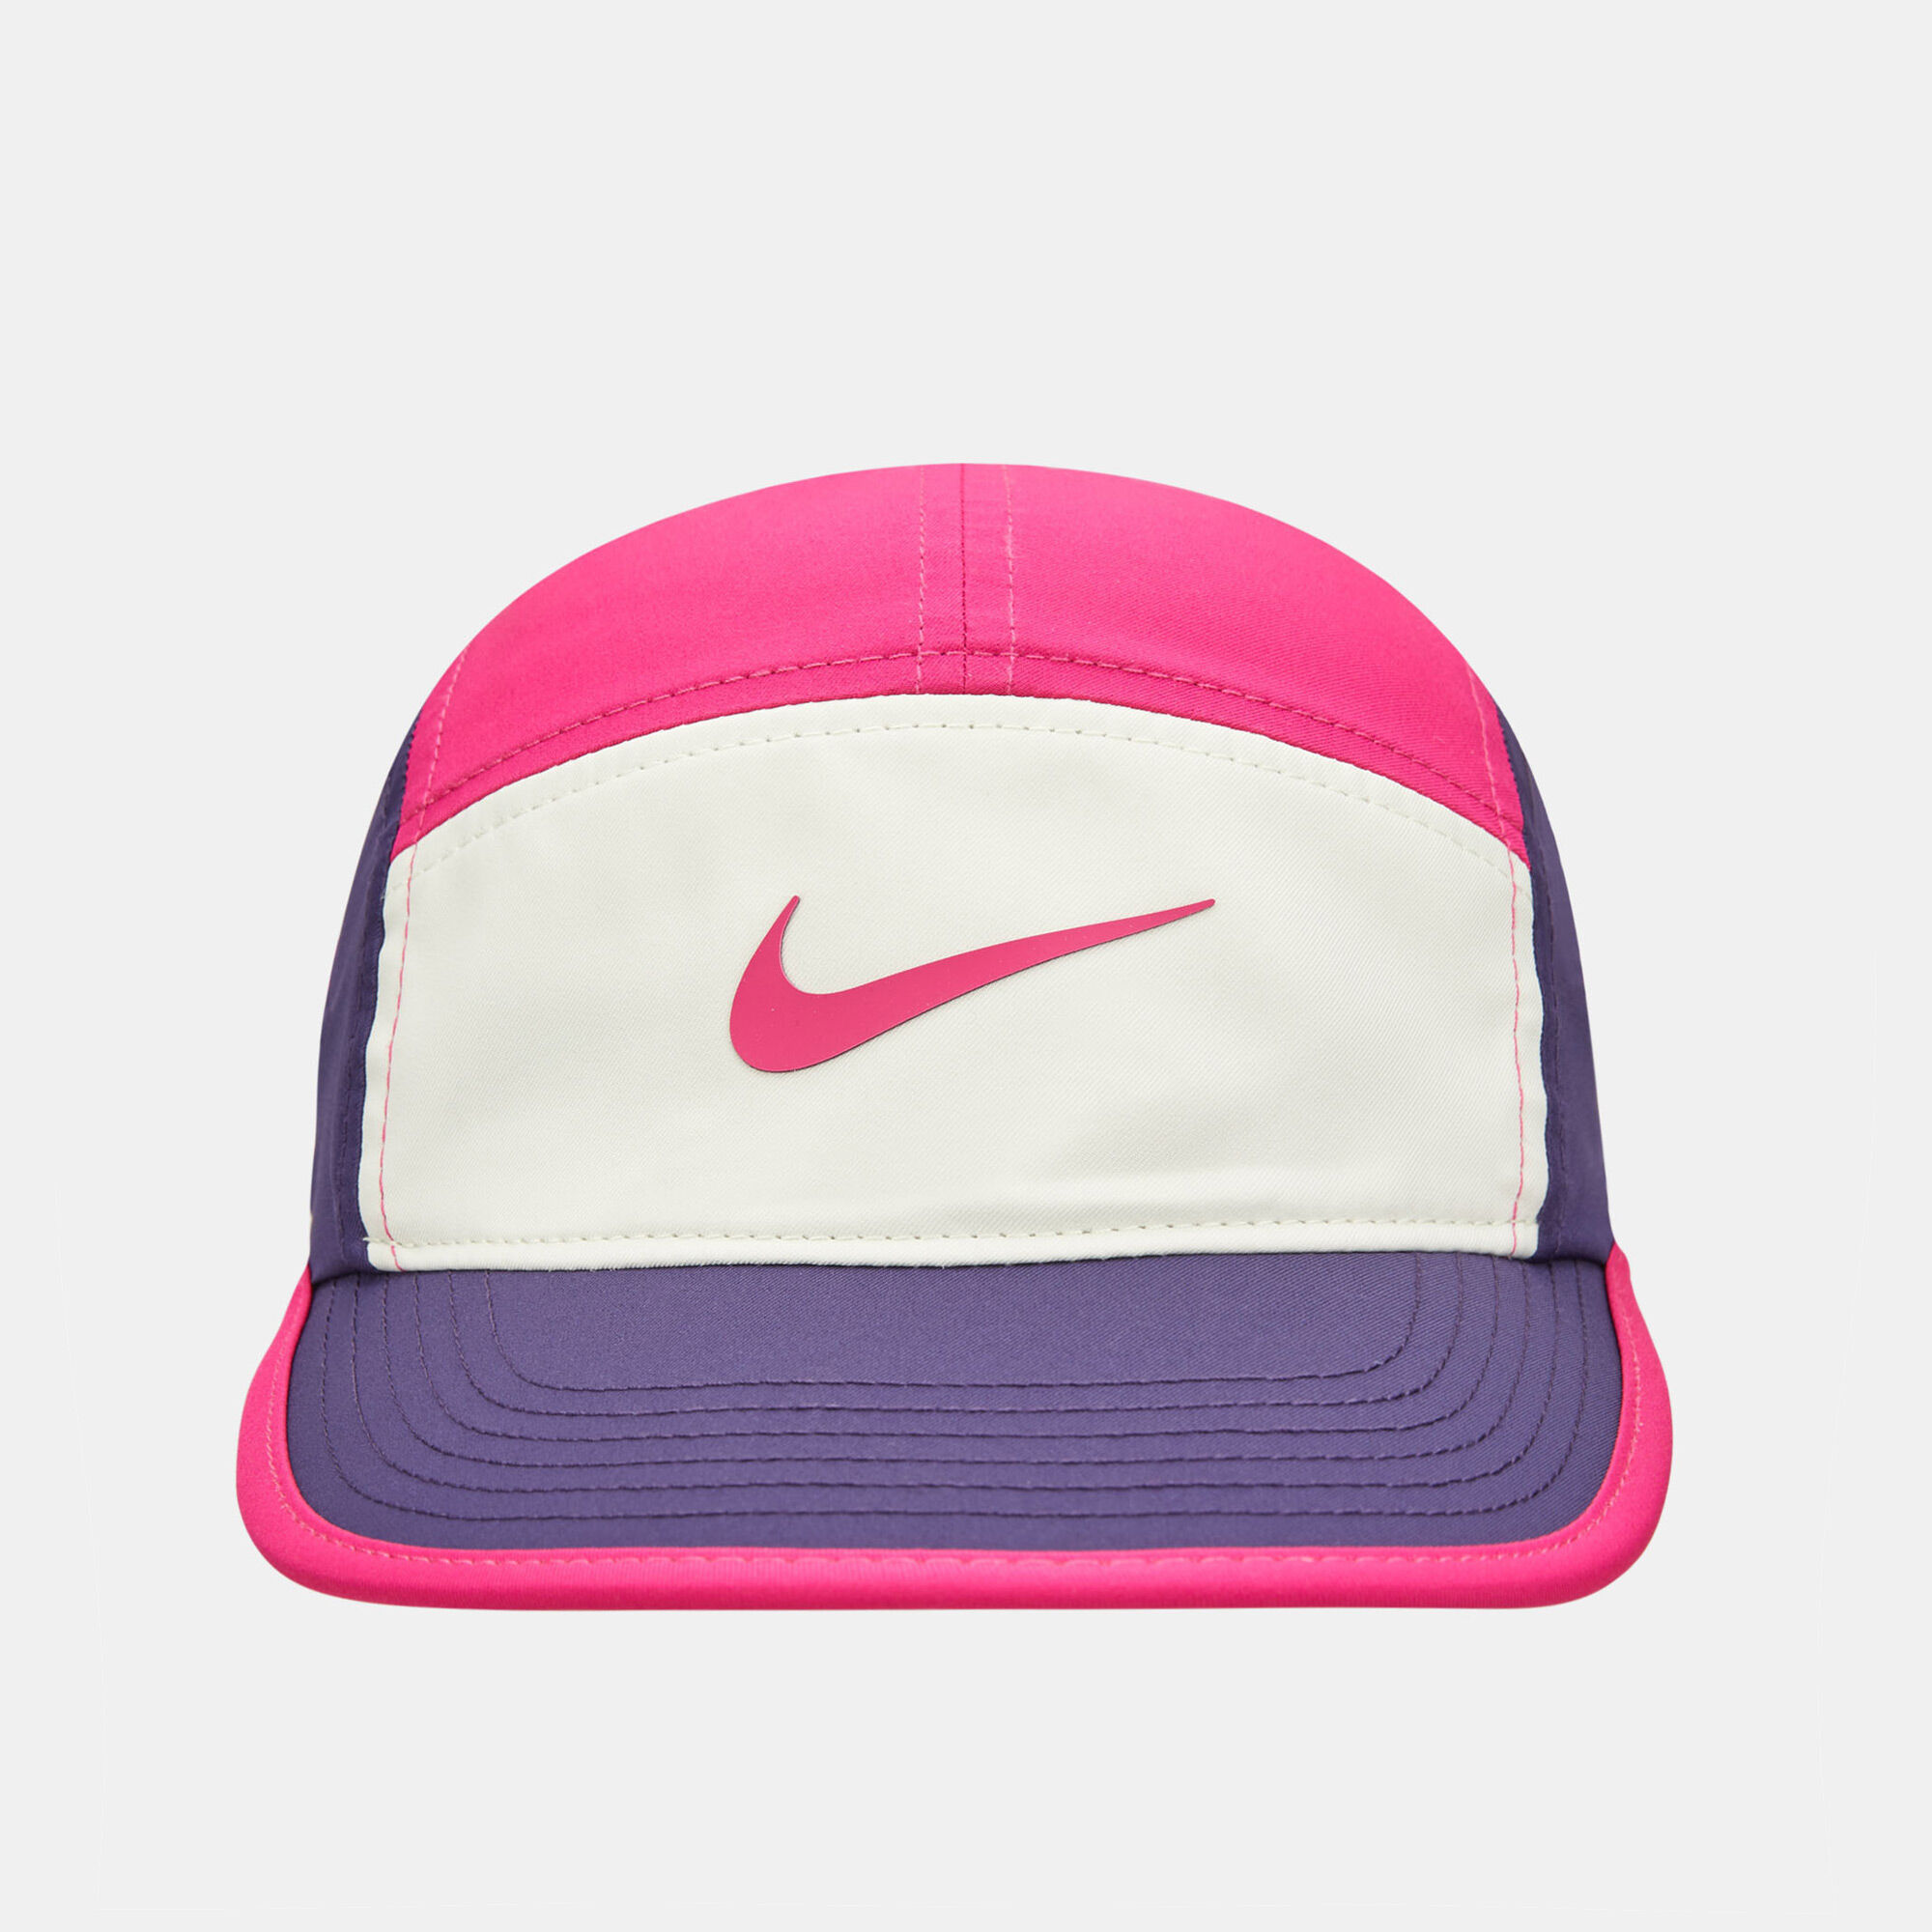 Supersports Vietnam Official, Nike Dri-Fit Club Structured Swoosh Cap -  Pink